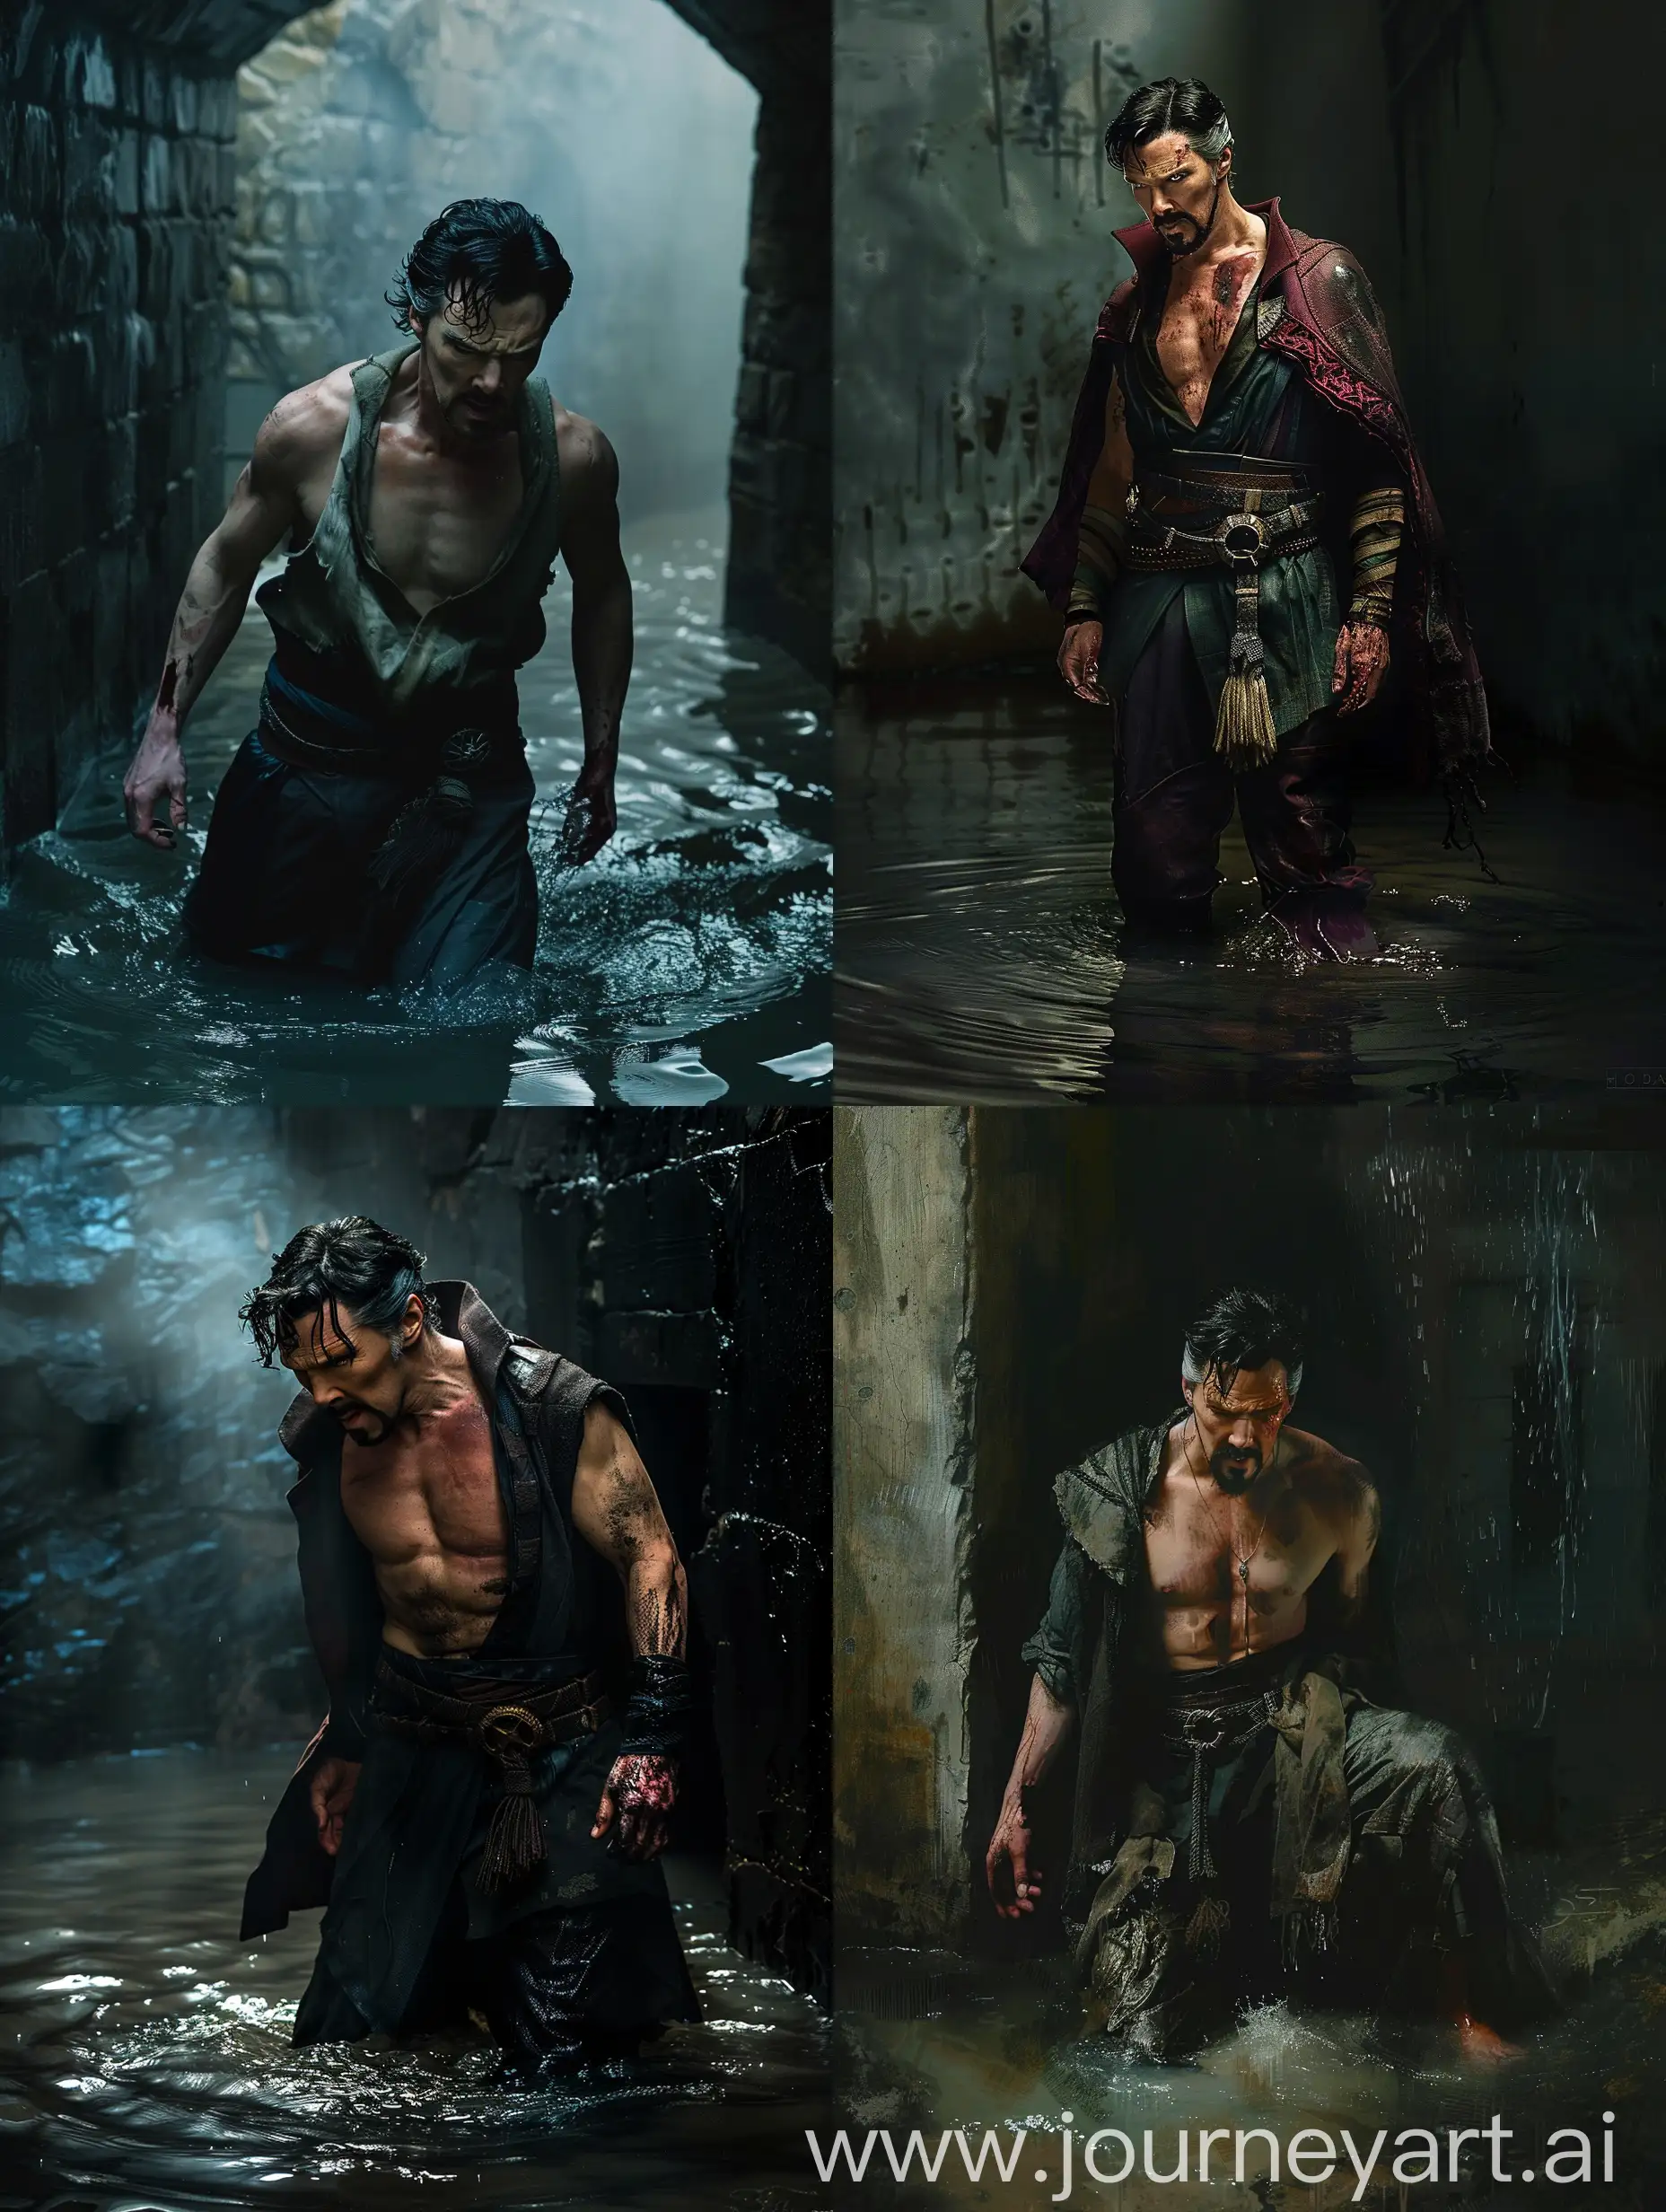 Doctor-Strange-in-Ripped-Shirtless-Outfit-in-Dark-Room-with-Rising-Water